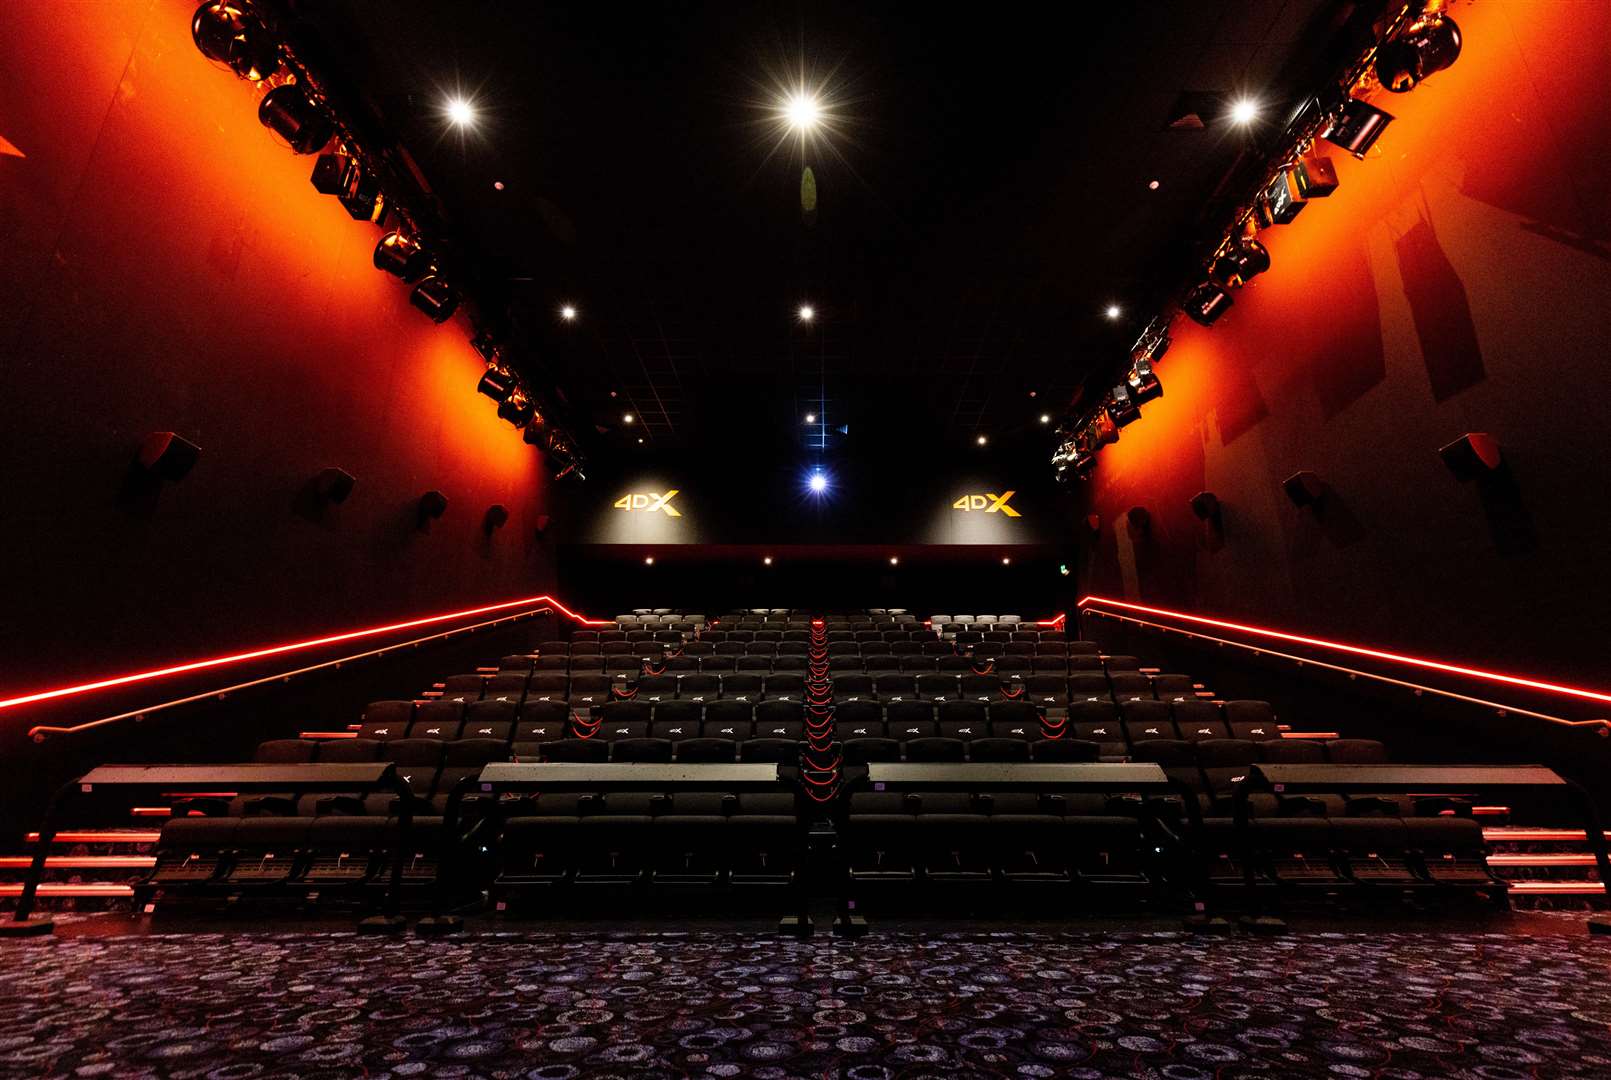 The 4DX screen uses motion chairs and special effects to bring the big screen to life. Picture: Andrew Fosker / PinPep